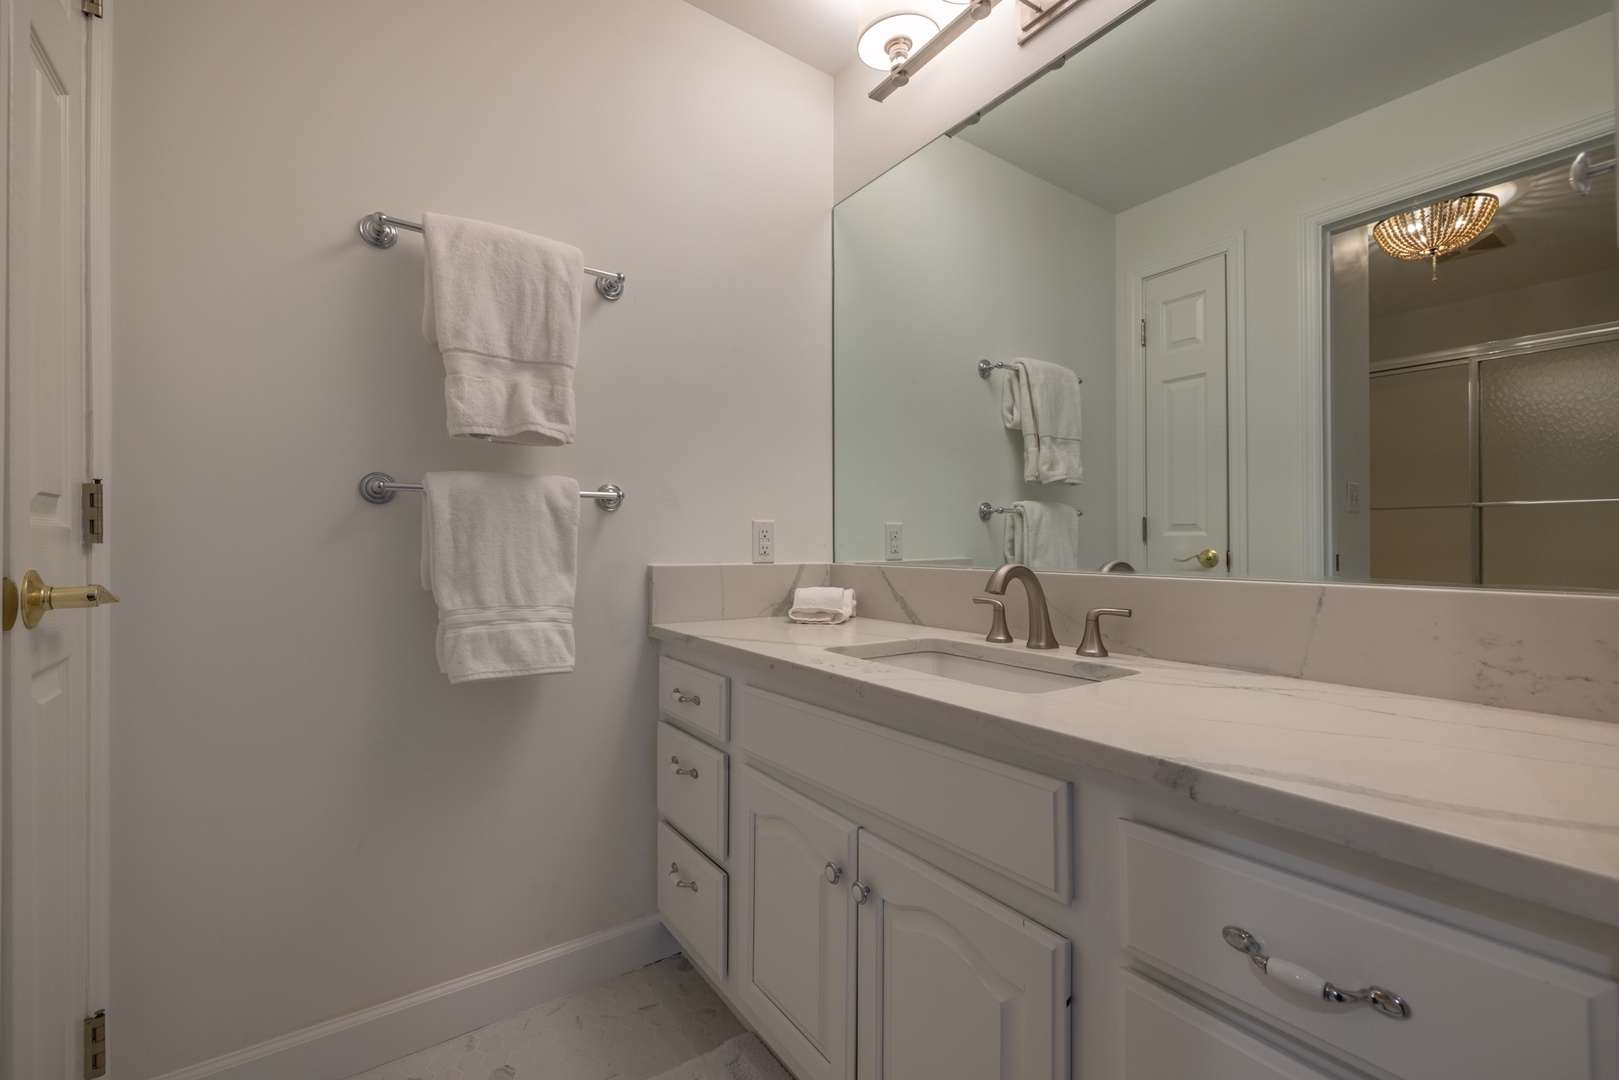 A third full bathroom on the lower level is easily accessible from every room